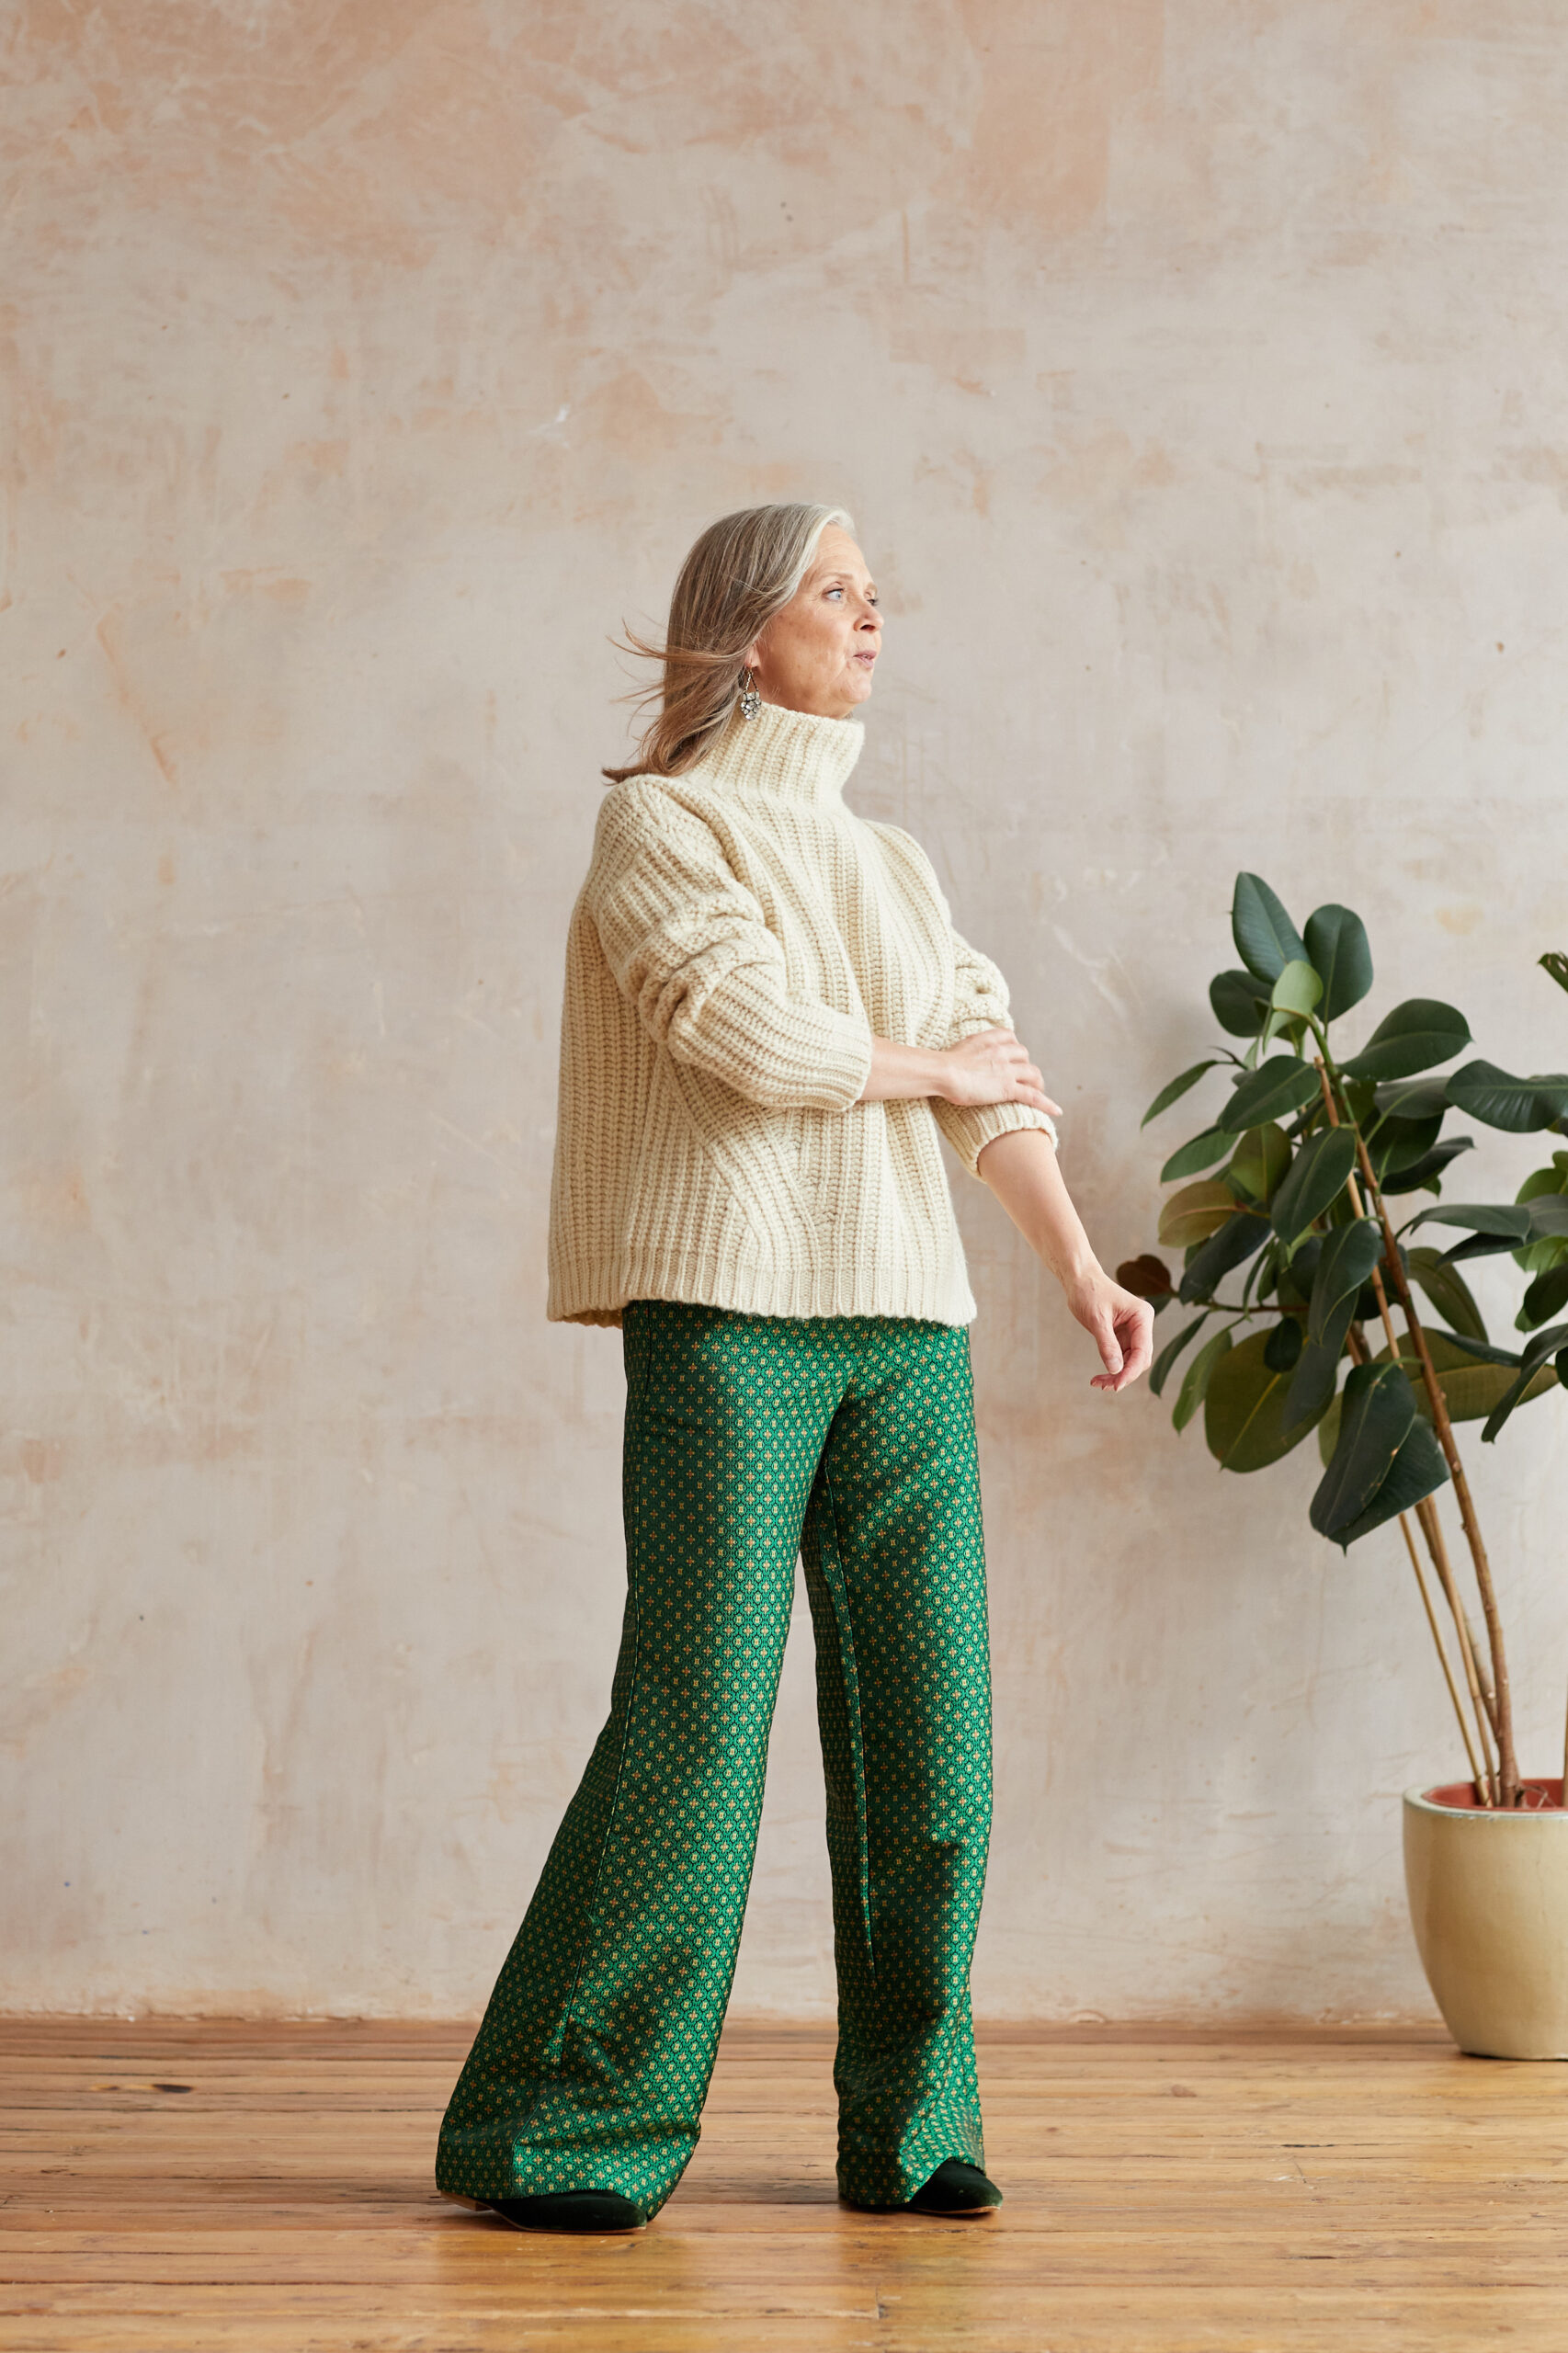 wear now, wear later satin pants - Style At A Certain Age